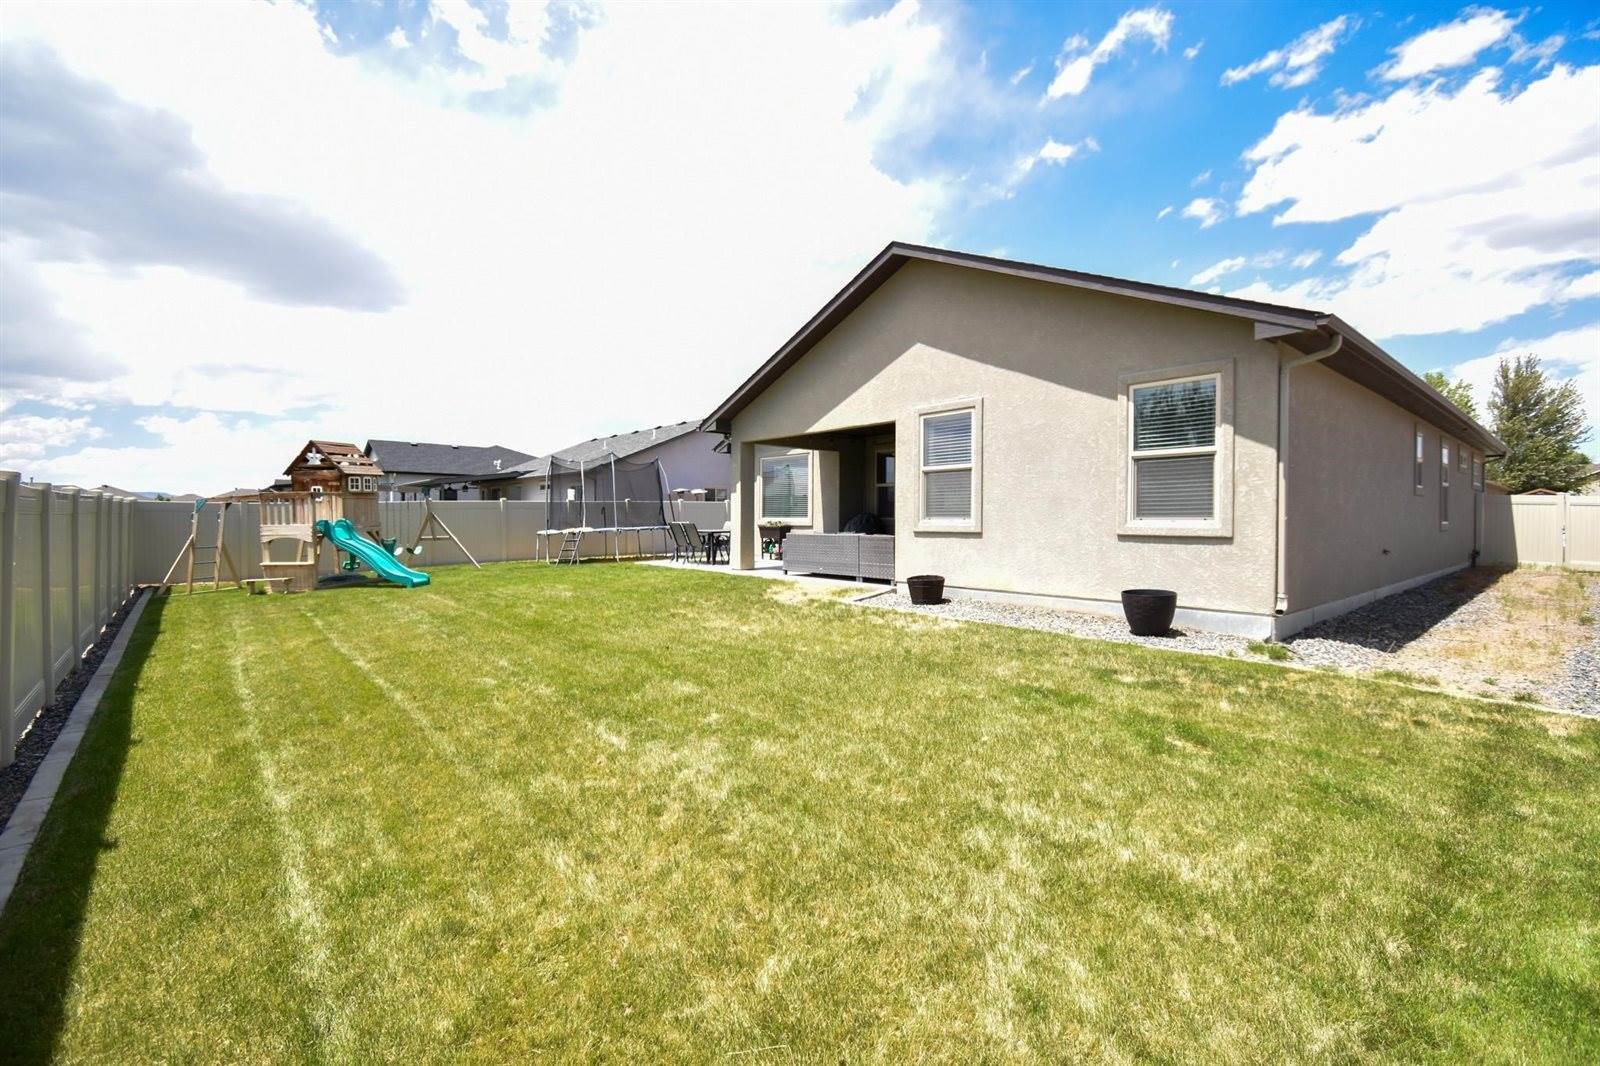 2949 Brodick Way, #C, Grand Junction, CO 81504